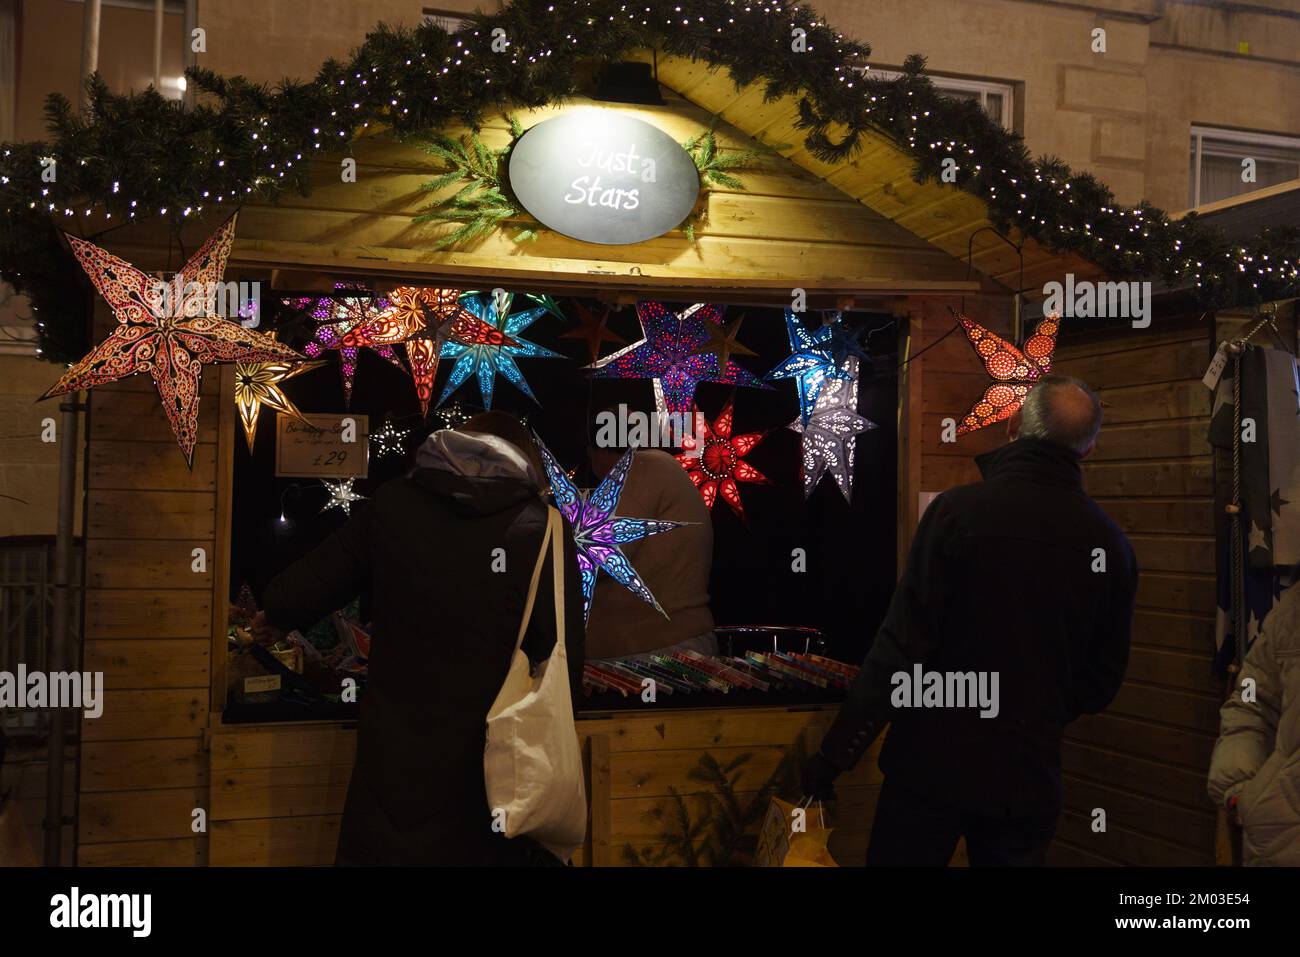 Christmas market stalls in Oxford, UK. Customers examine goods on sale. Stores stay open later hoping to increase sales over Christmas. Stock Photo